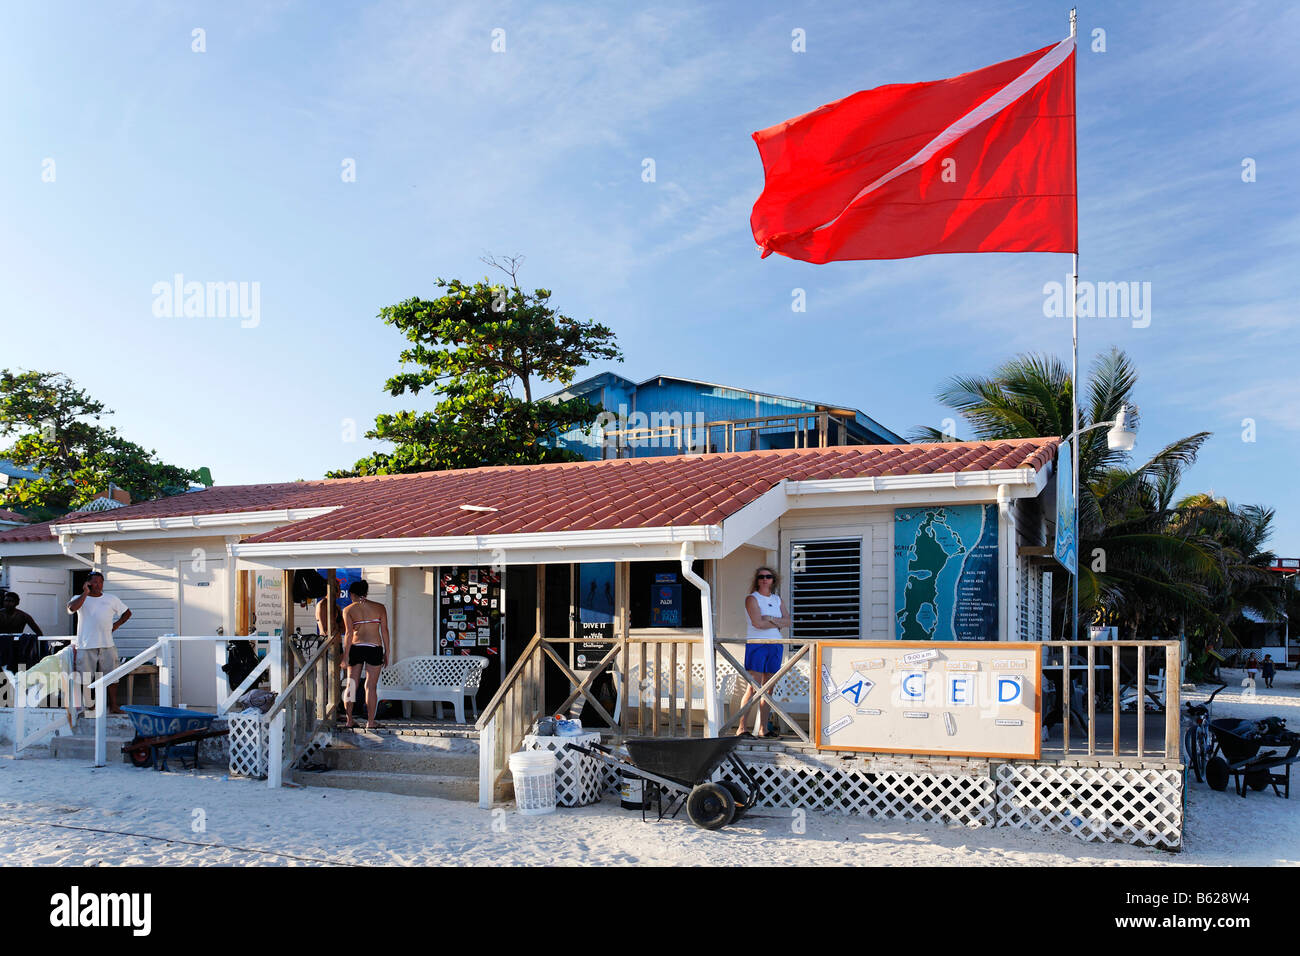 Diving flag flying over a scuba diving center in San Pedro, Ambergris Cay Island, Belize, Central America, Caribbean Stock Photo